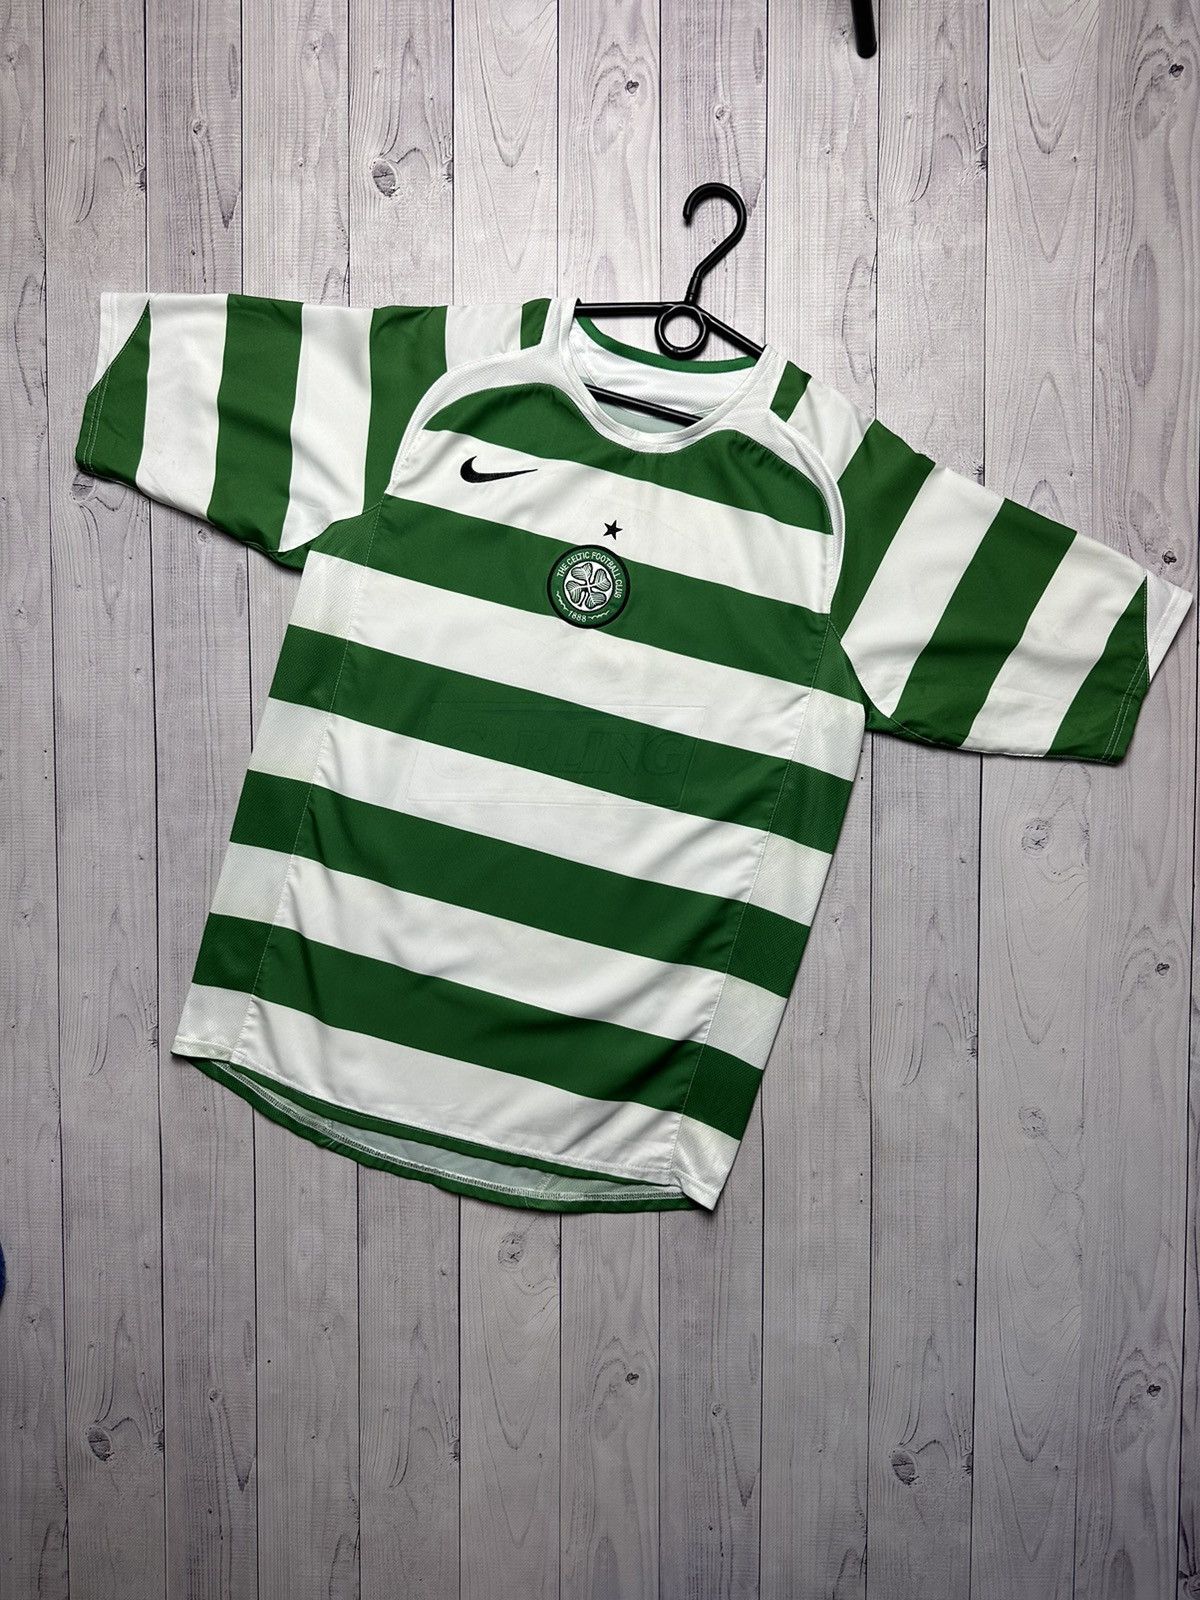 Pre-owned Nike X Soccer Jersey Vintage Nike Total 90 Celtic Soccer Jersey Size S Striped In Green